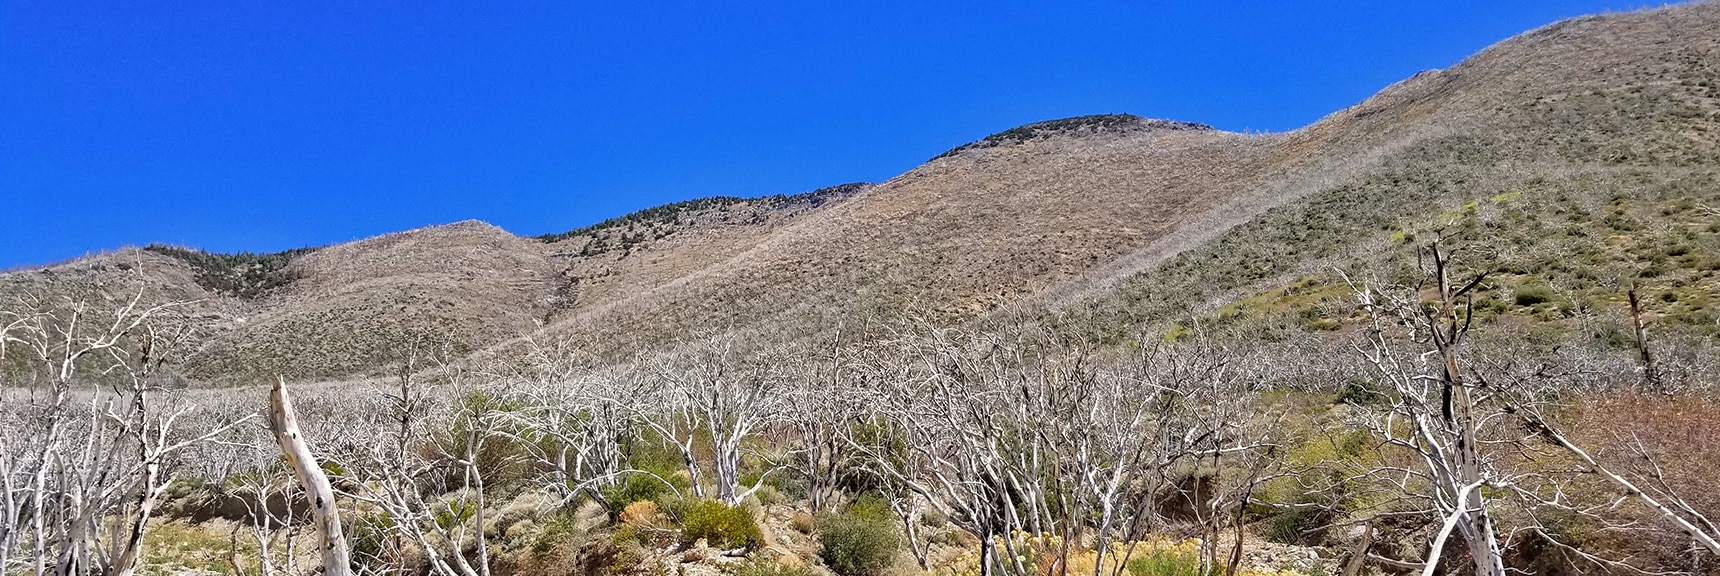 Approach Ridge Possibilities to the Right Toward Harris Mountain | Harris Mountain from Lovell Canyon Nevada